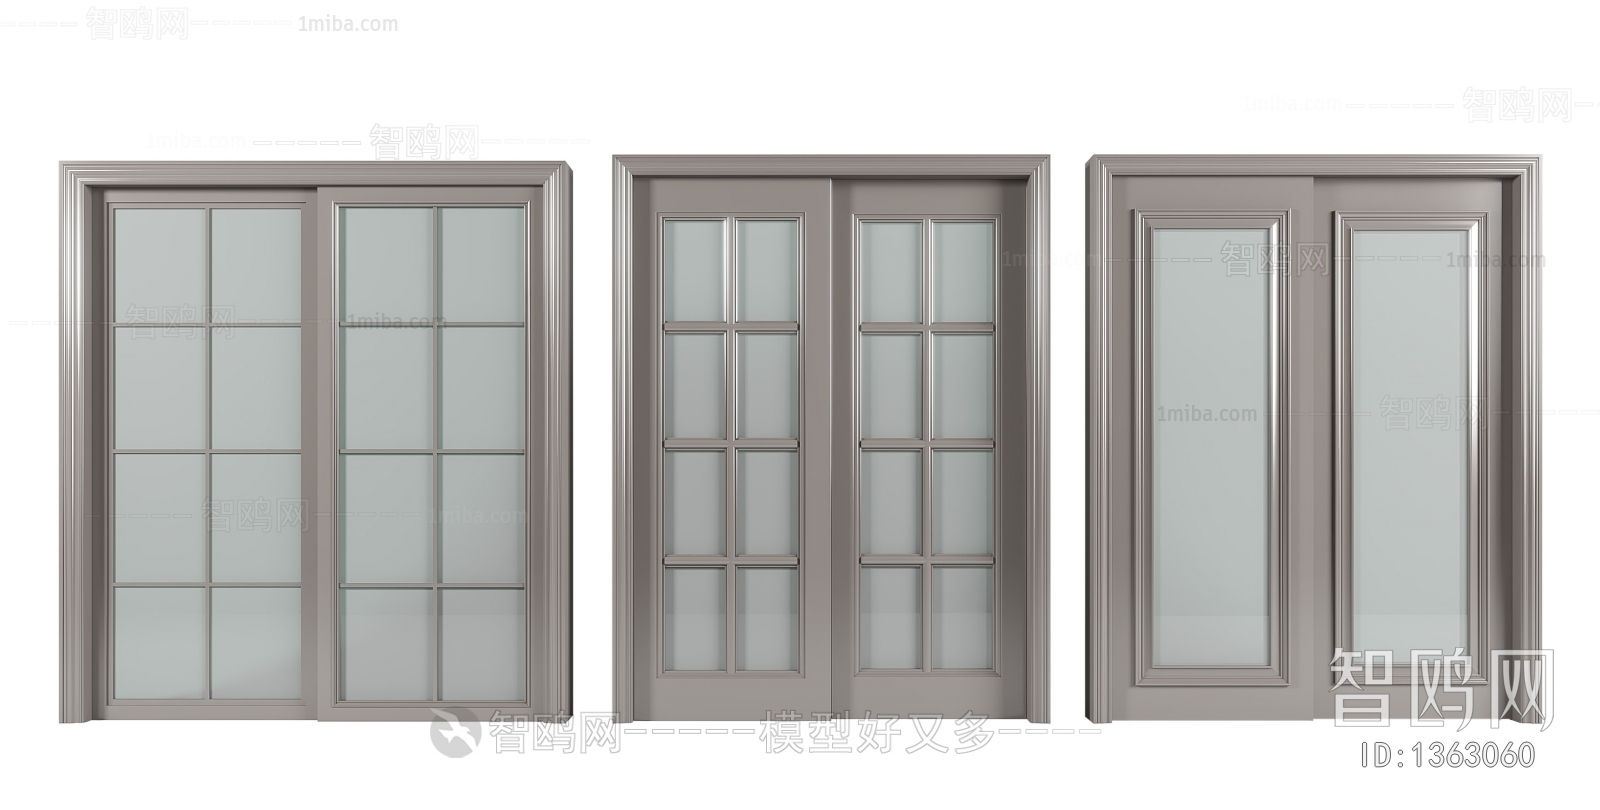 Large preview of 3D Model of sliding glass doors | Door glass design,  Sliding glass door, Glass door